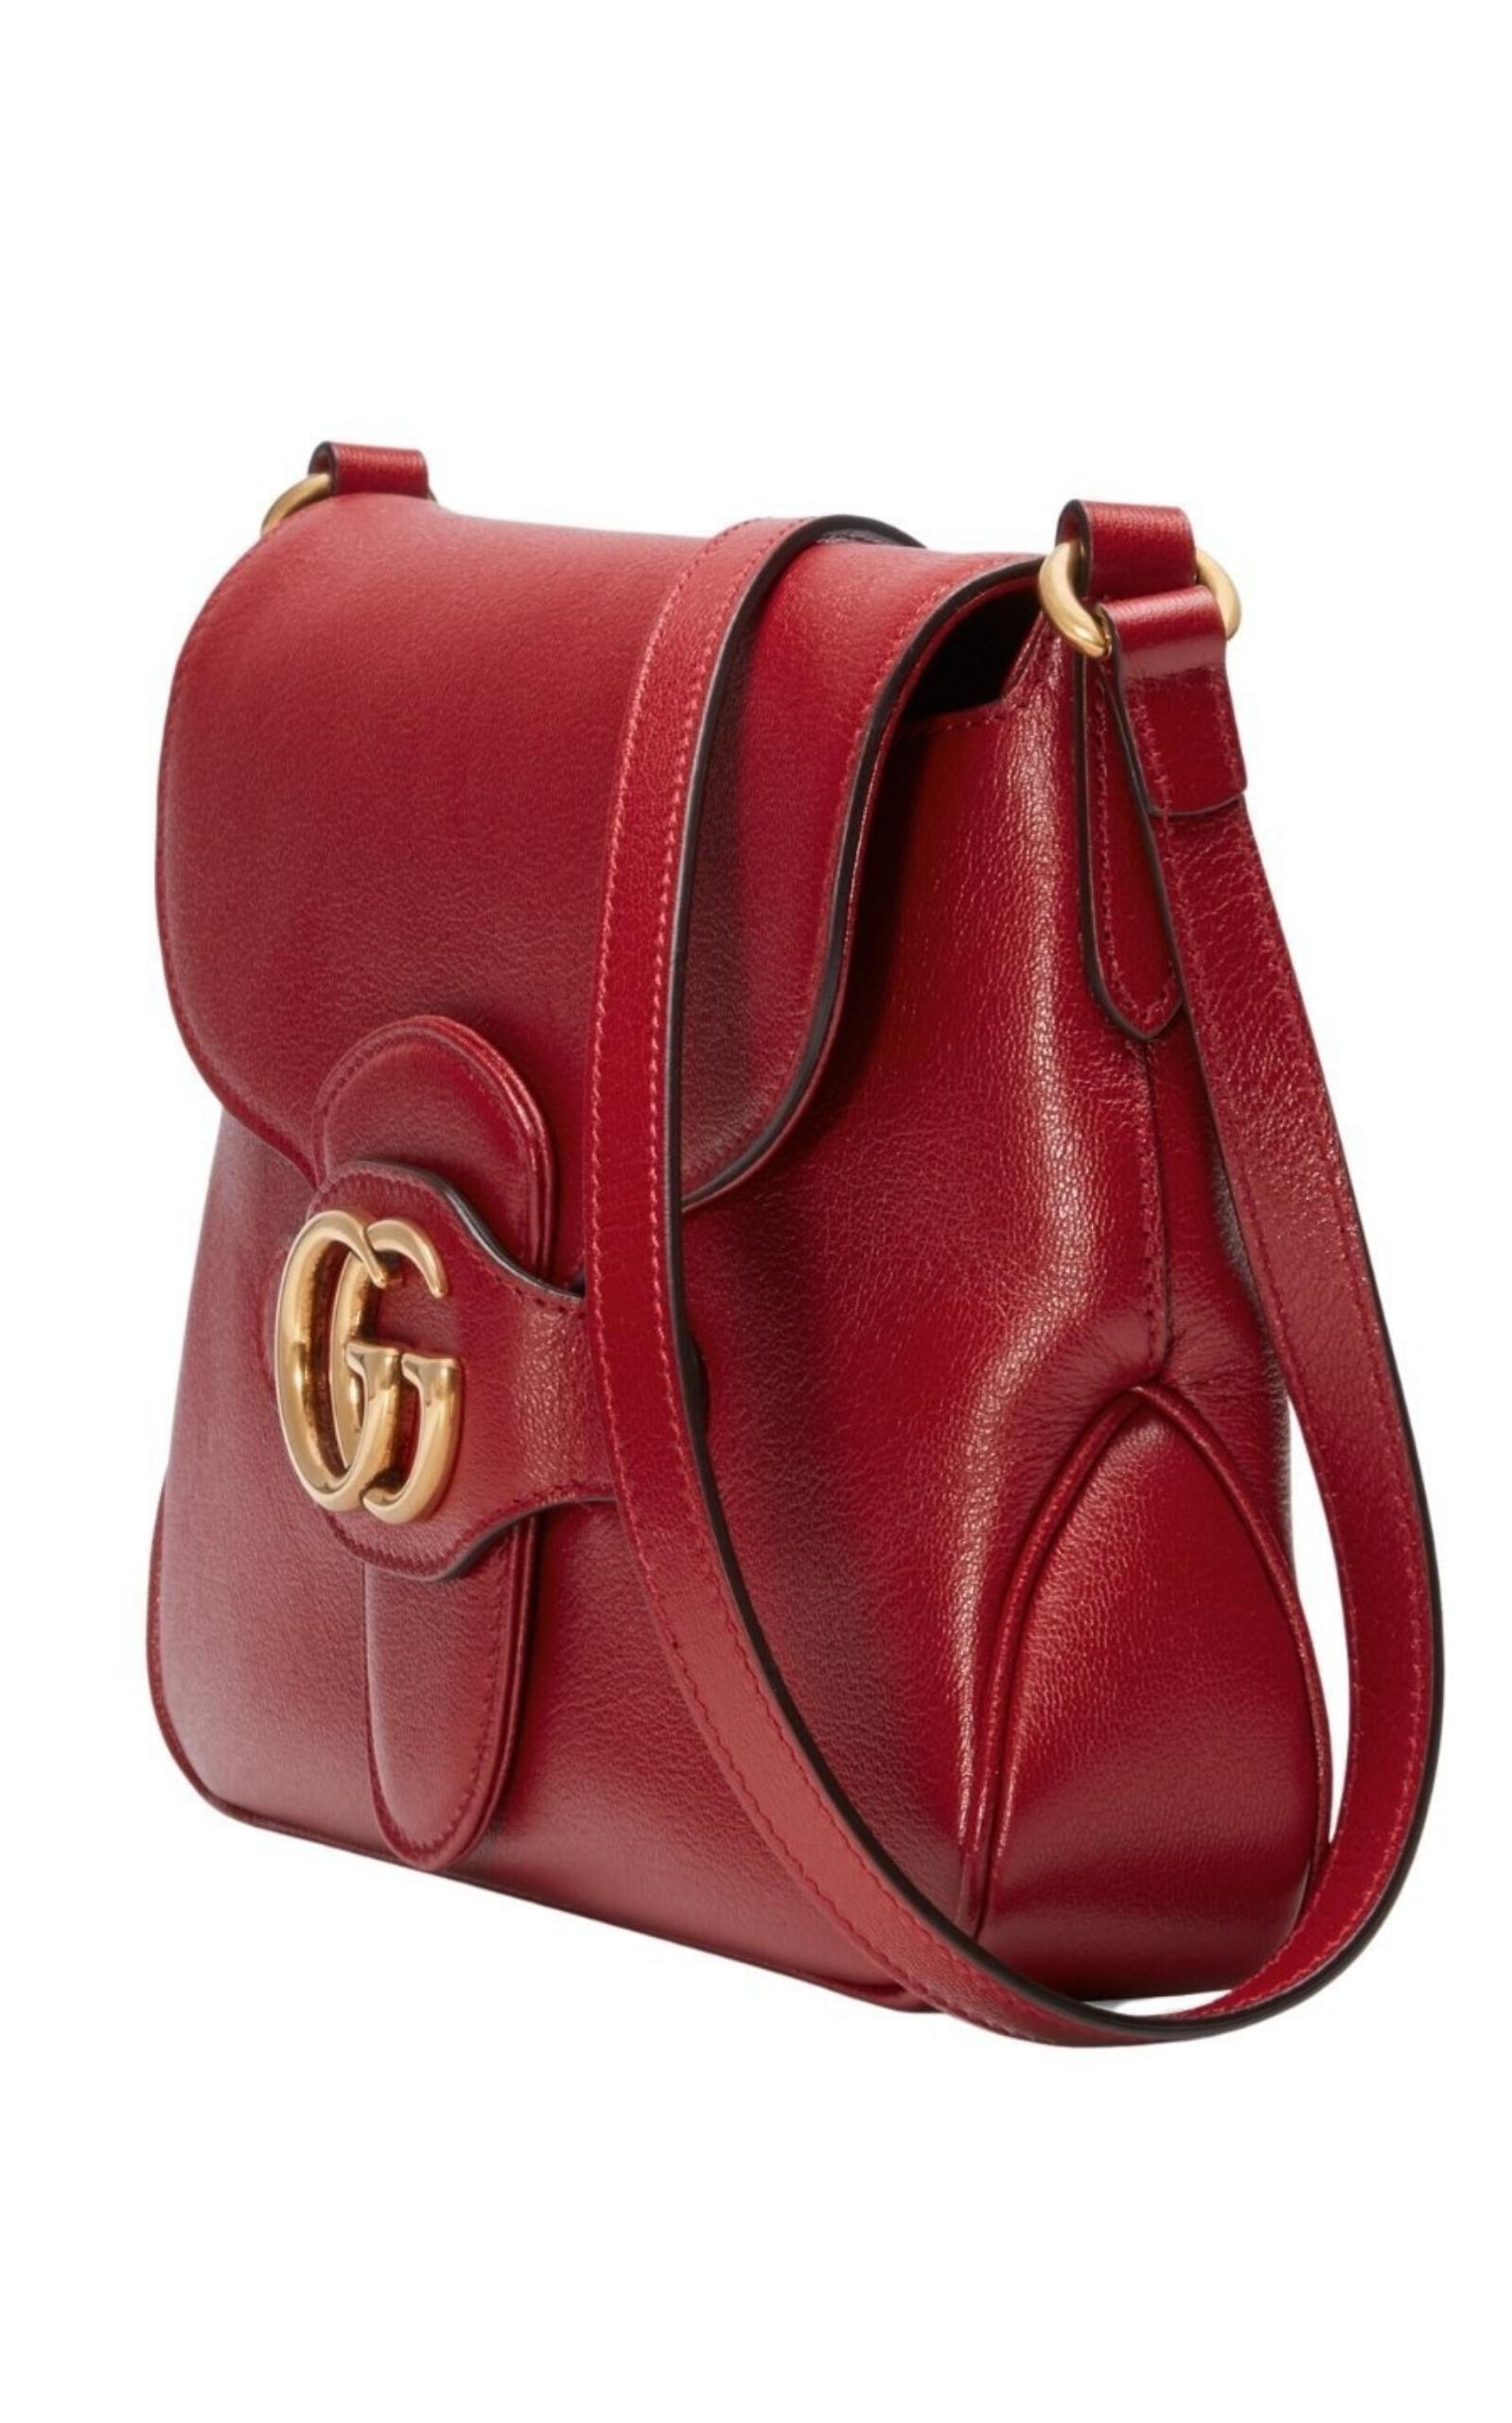 Gucci Small Messenger with Double GG Bag in Red